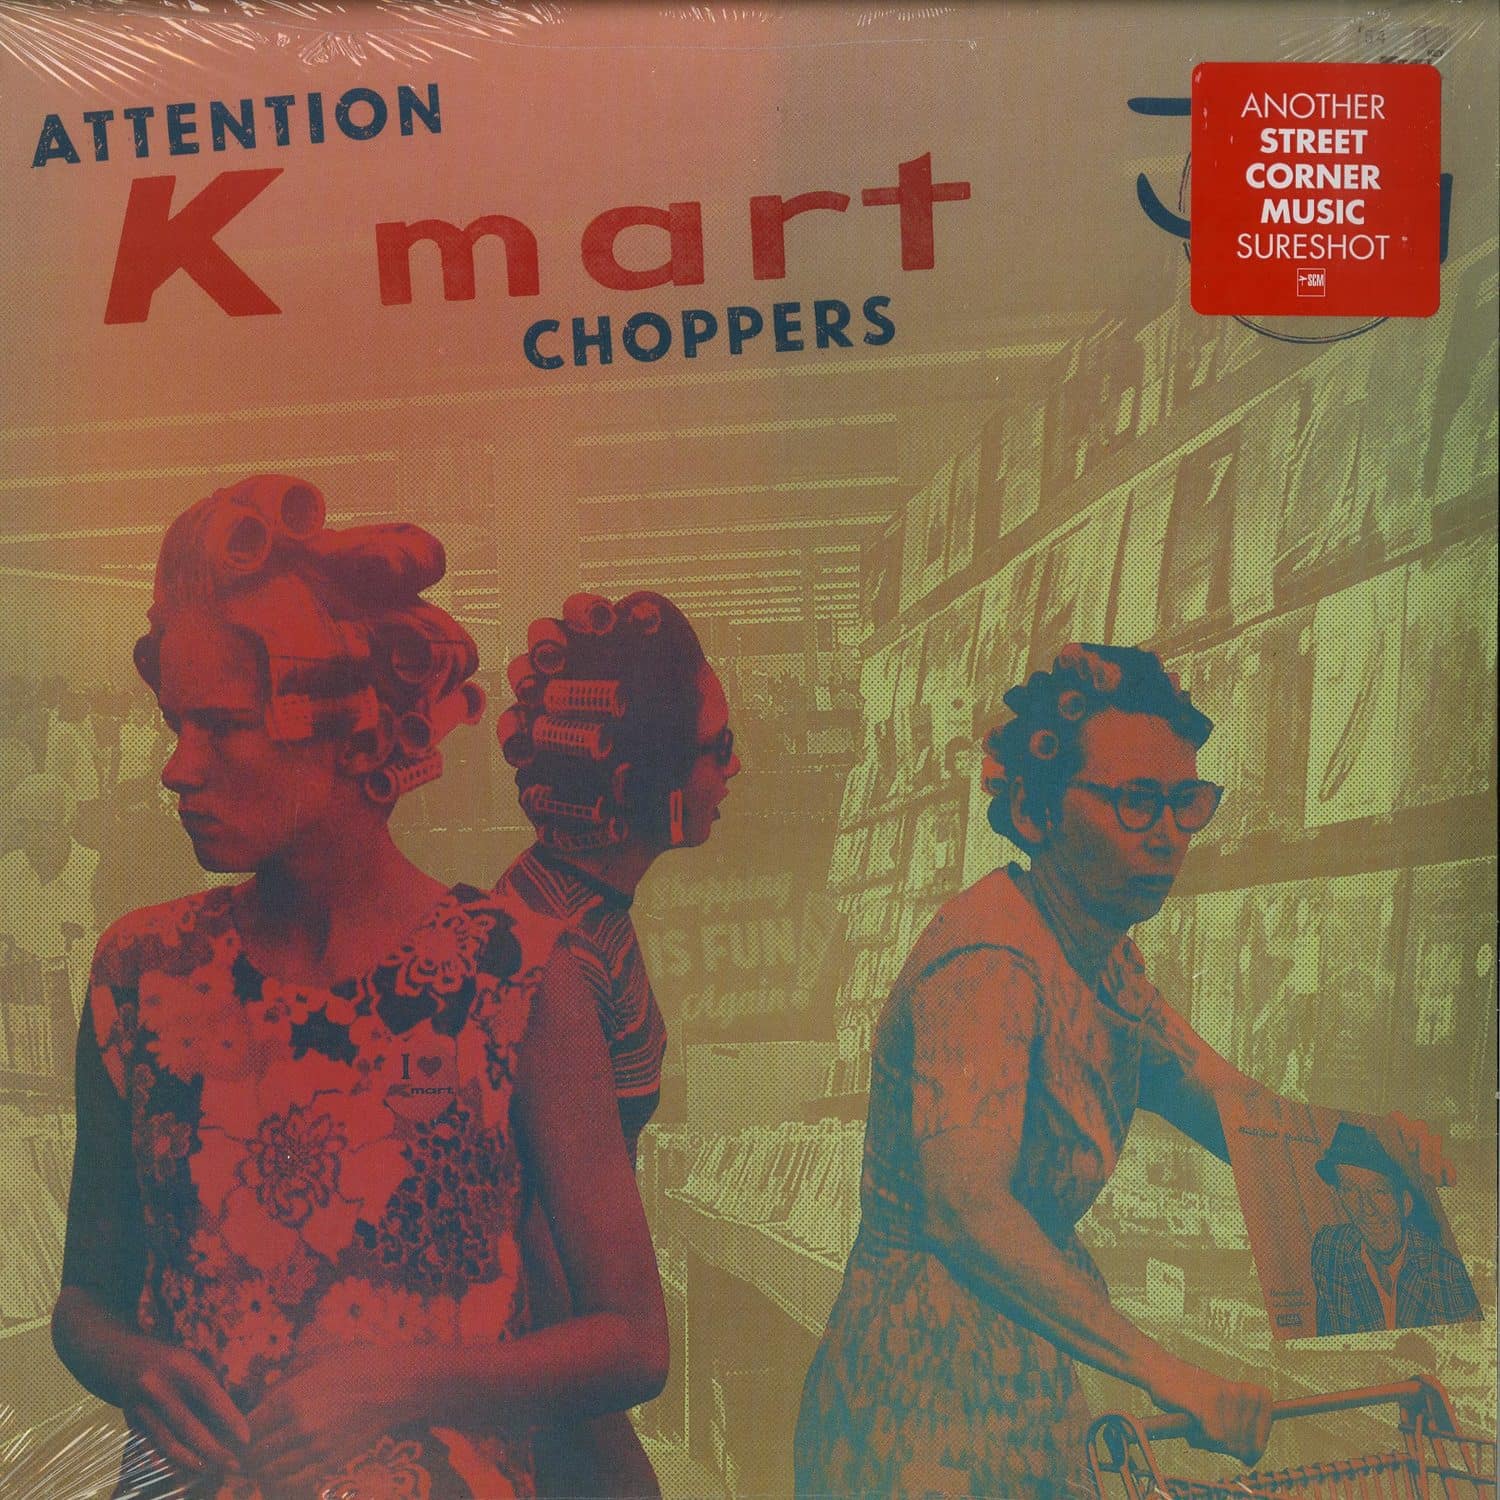 Juicy The Amissary - ATTENTION K-MART CHOPPERS 